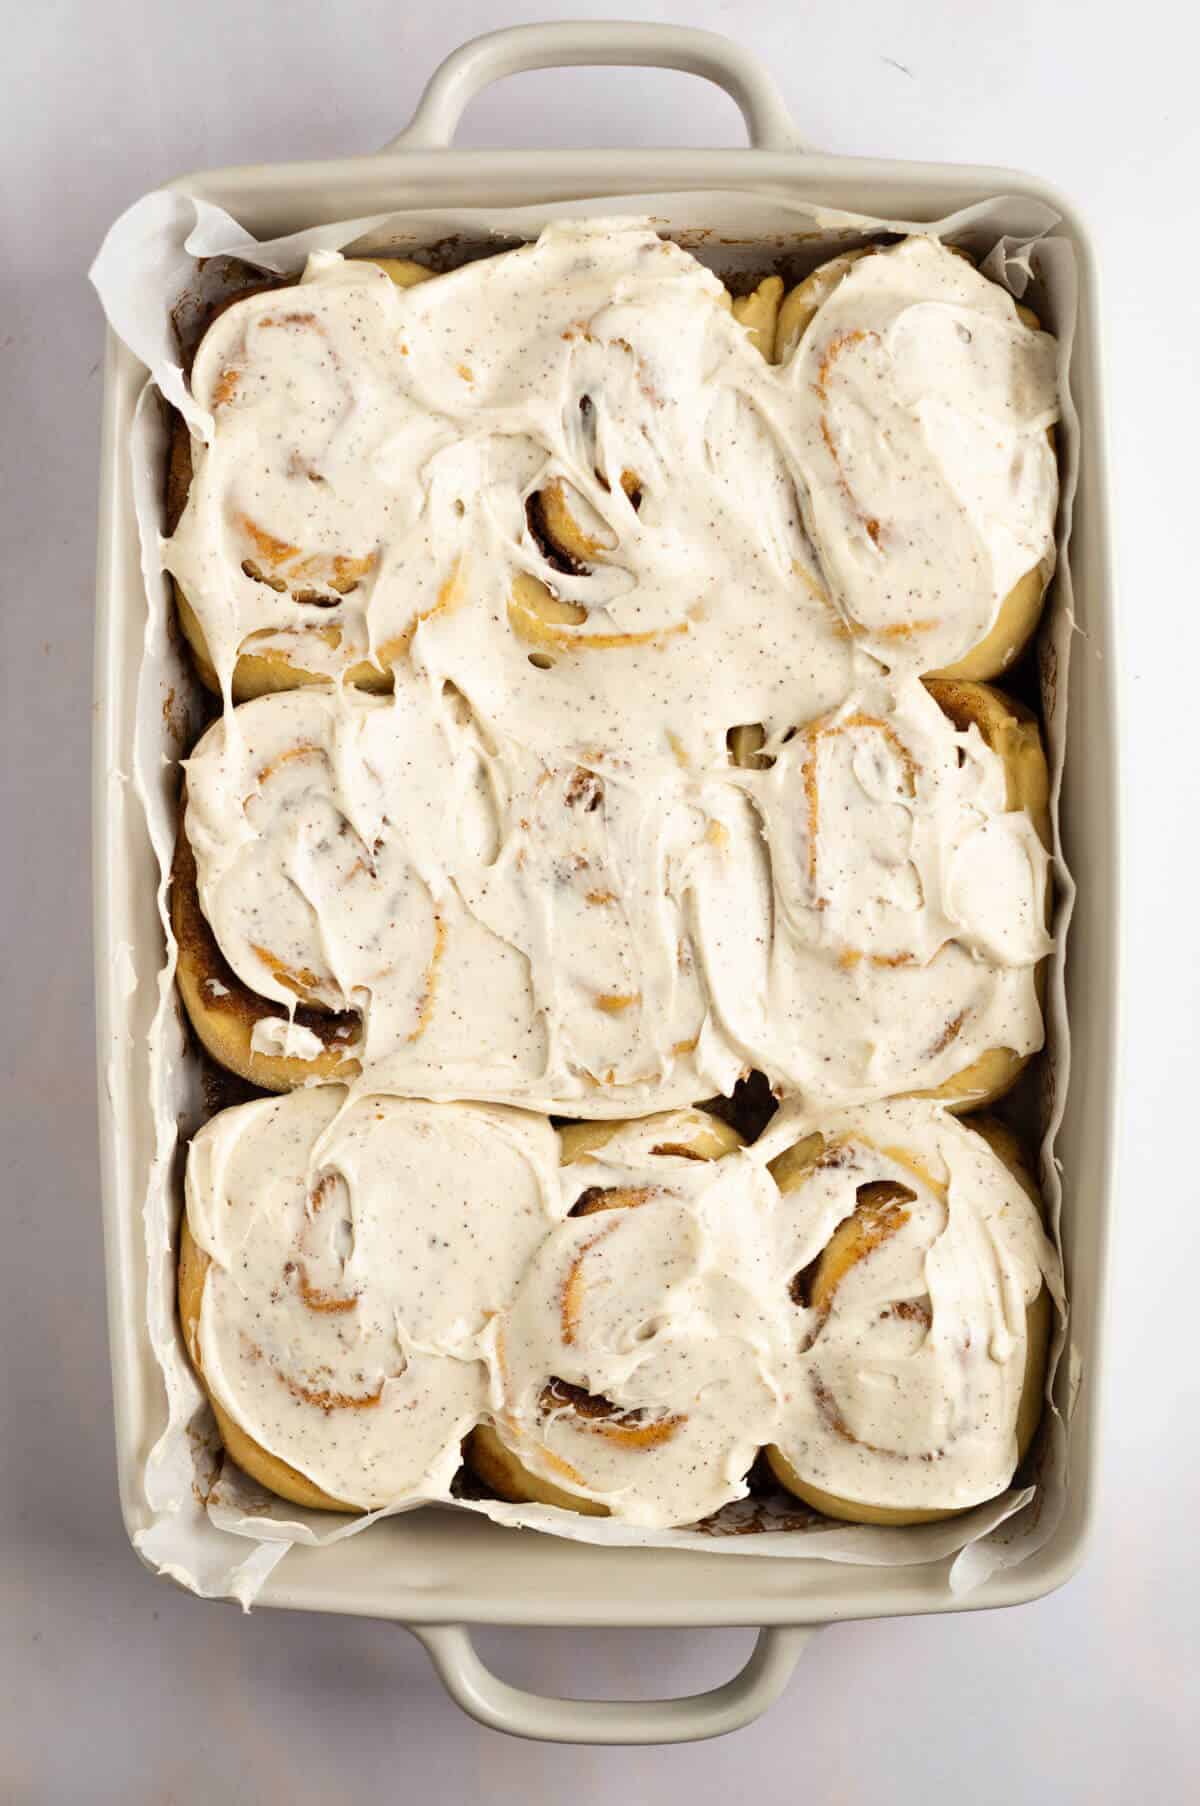 The cooked cinnamon rolls covered with the brown butter frosting.